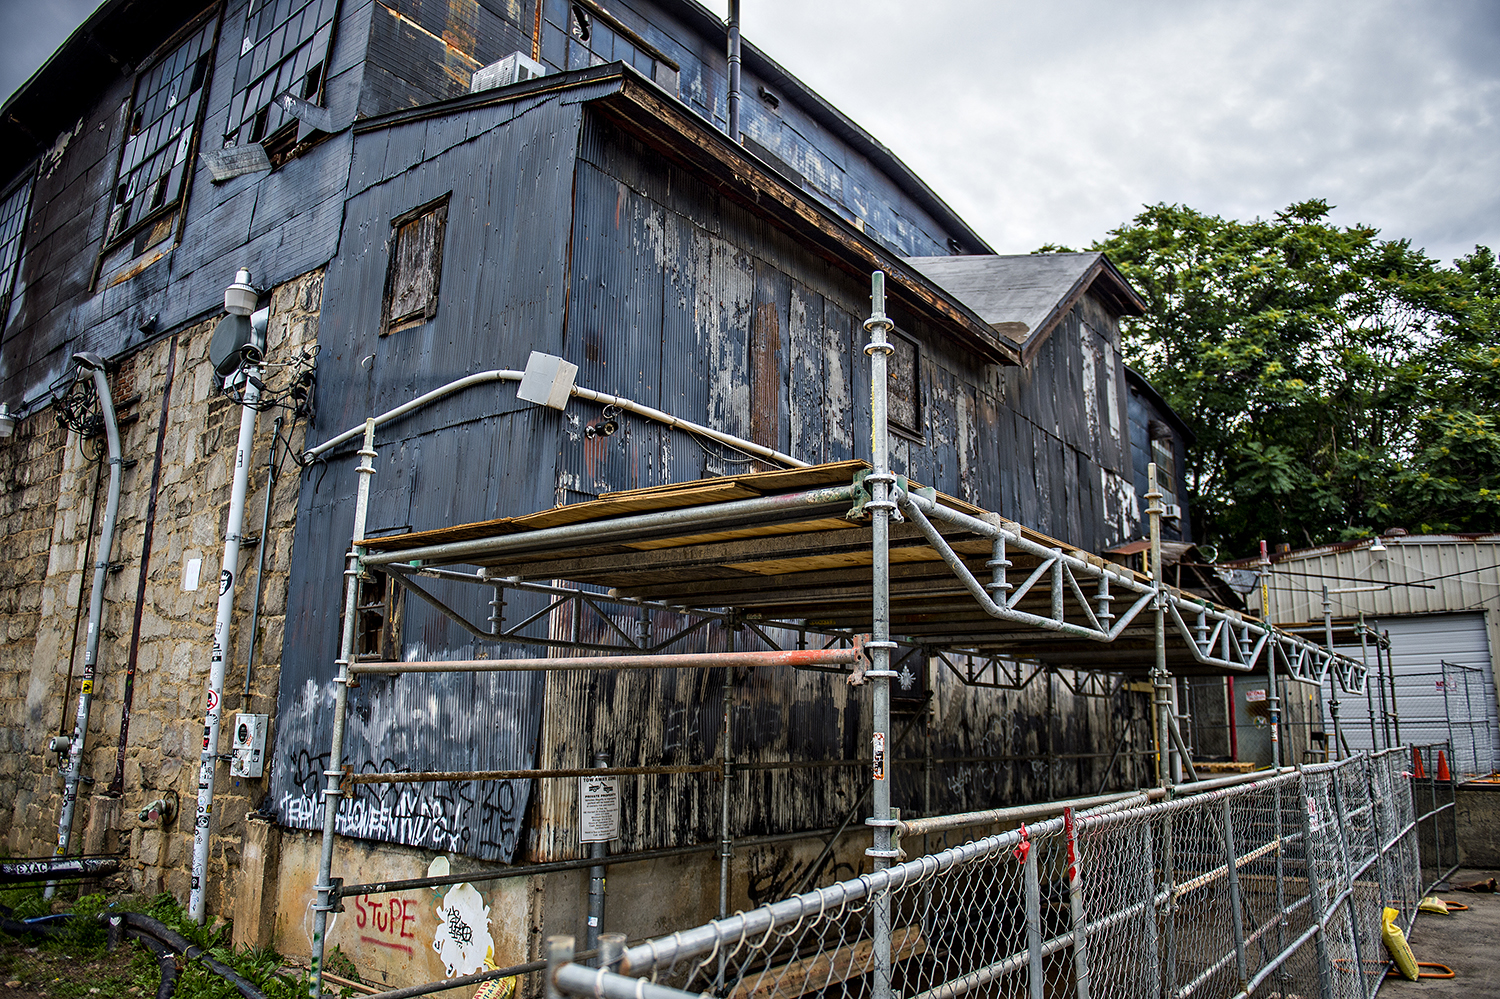 Scaffolding and fencing have been set up around the outside of The Masquerade off North Angier Avenue. This historically protected segment will house mixed uses near the large green field of Historic Fourth Ward Park's north end.  